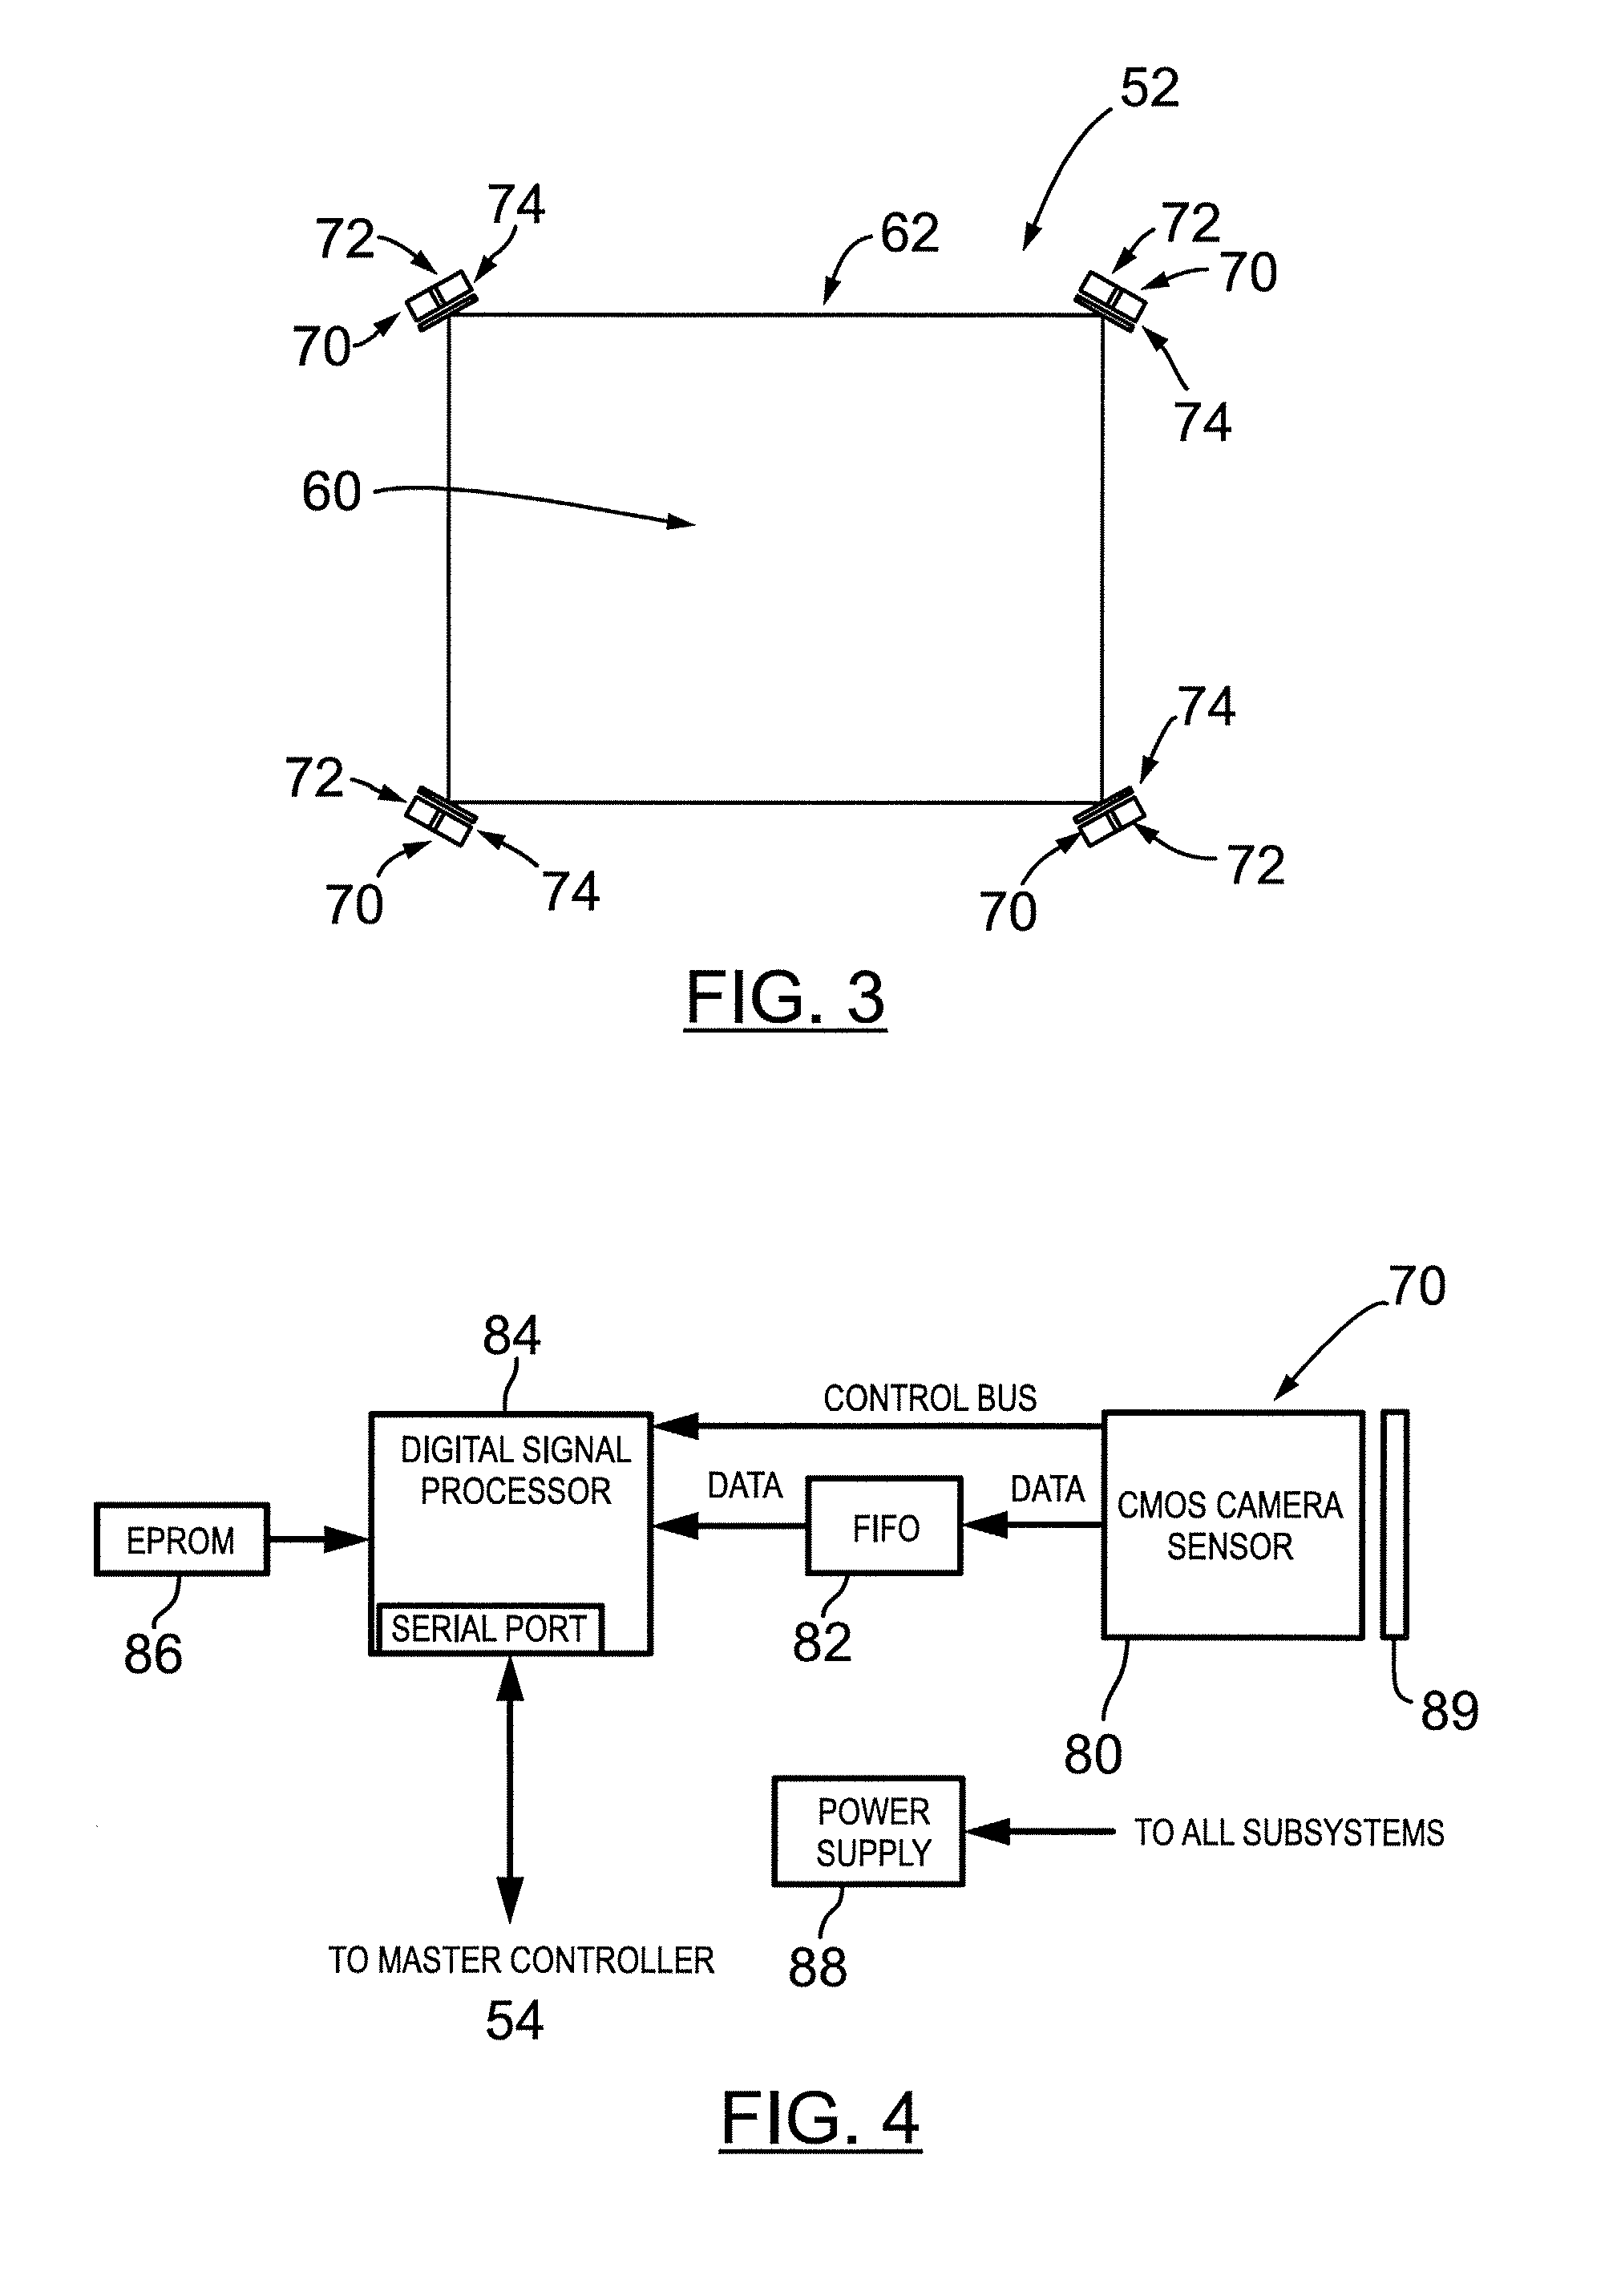 Apparatus for detecting a pointer within a region of interest